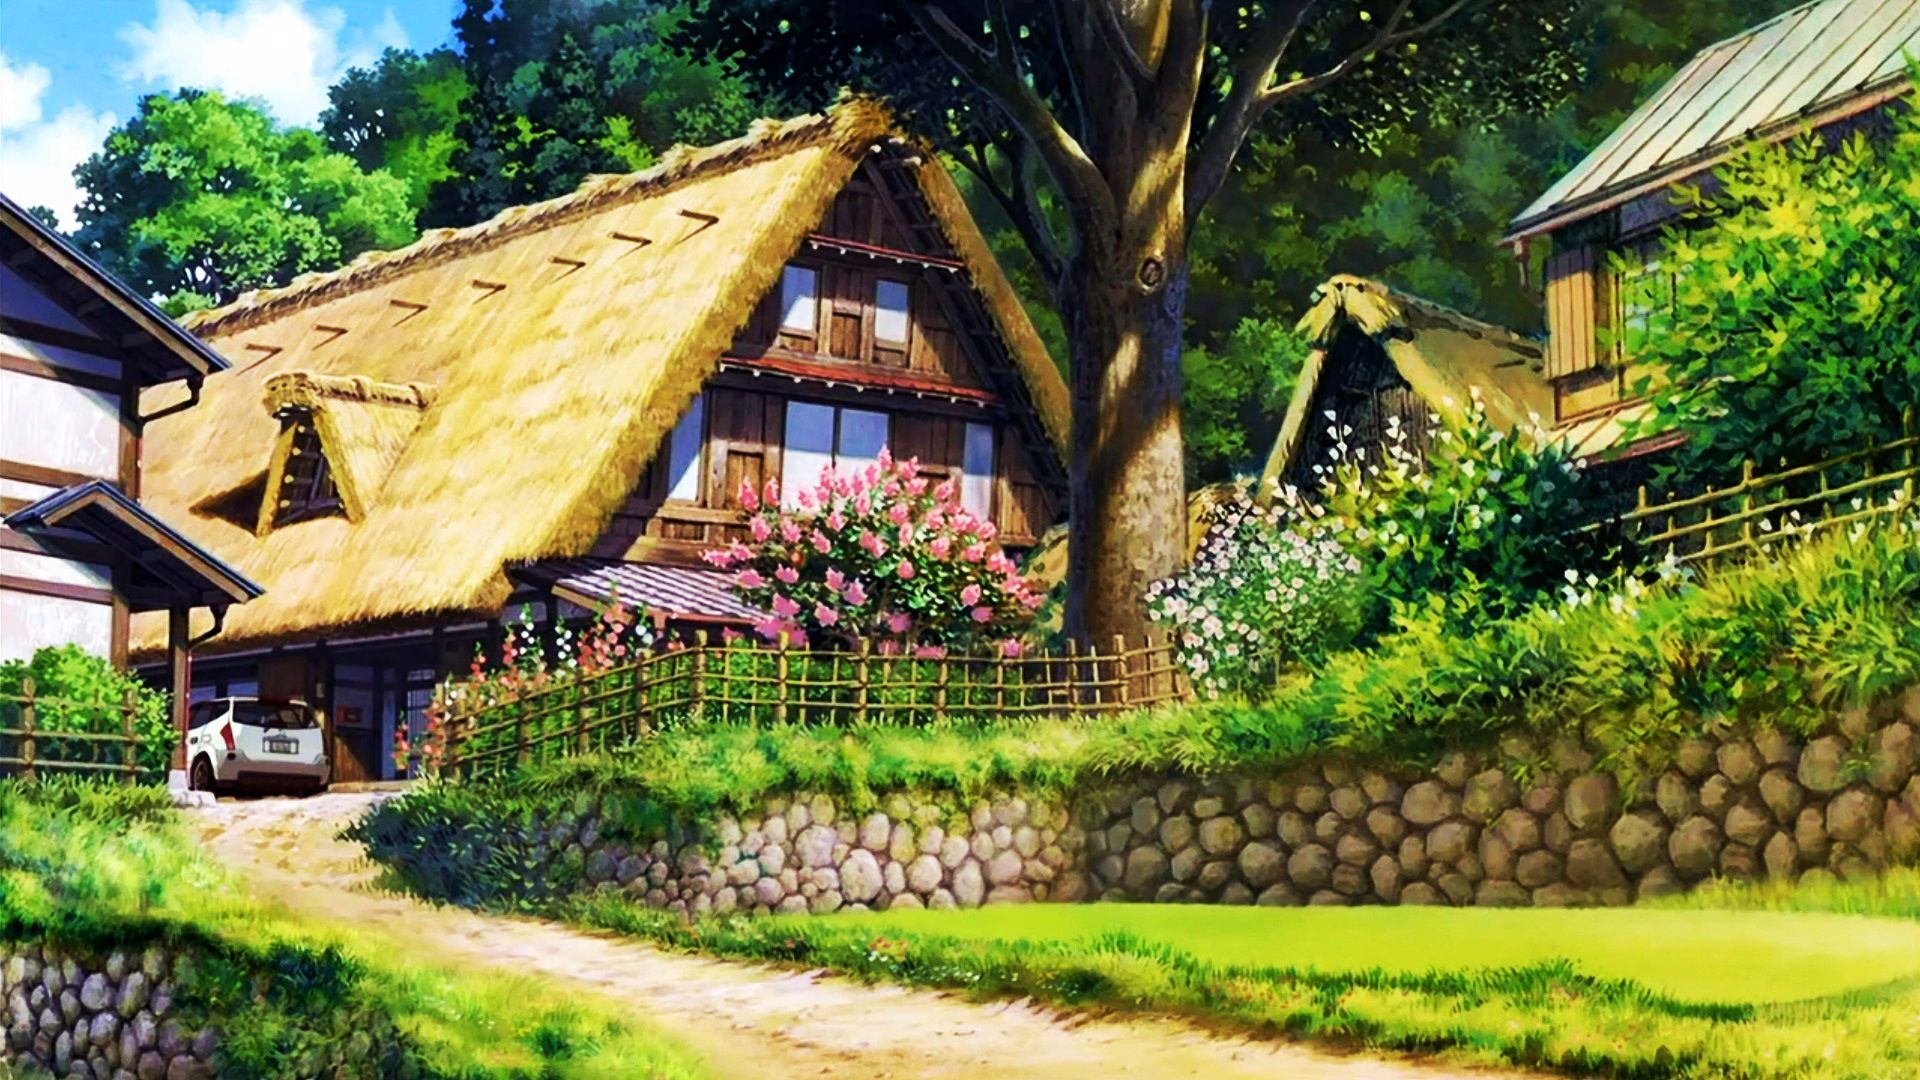 60 Country Cottage Wallpapers   Download at WallpaperBro